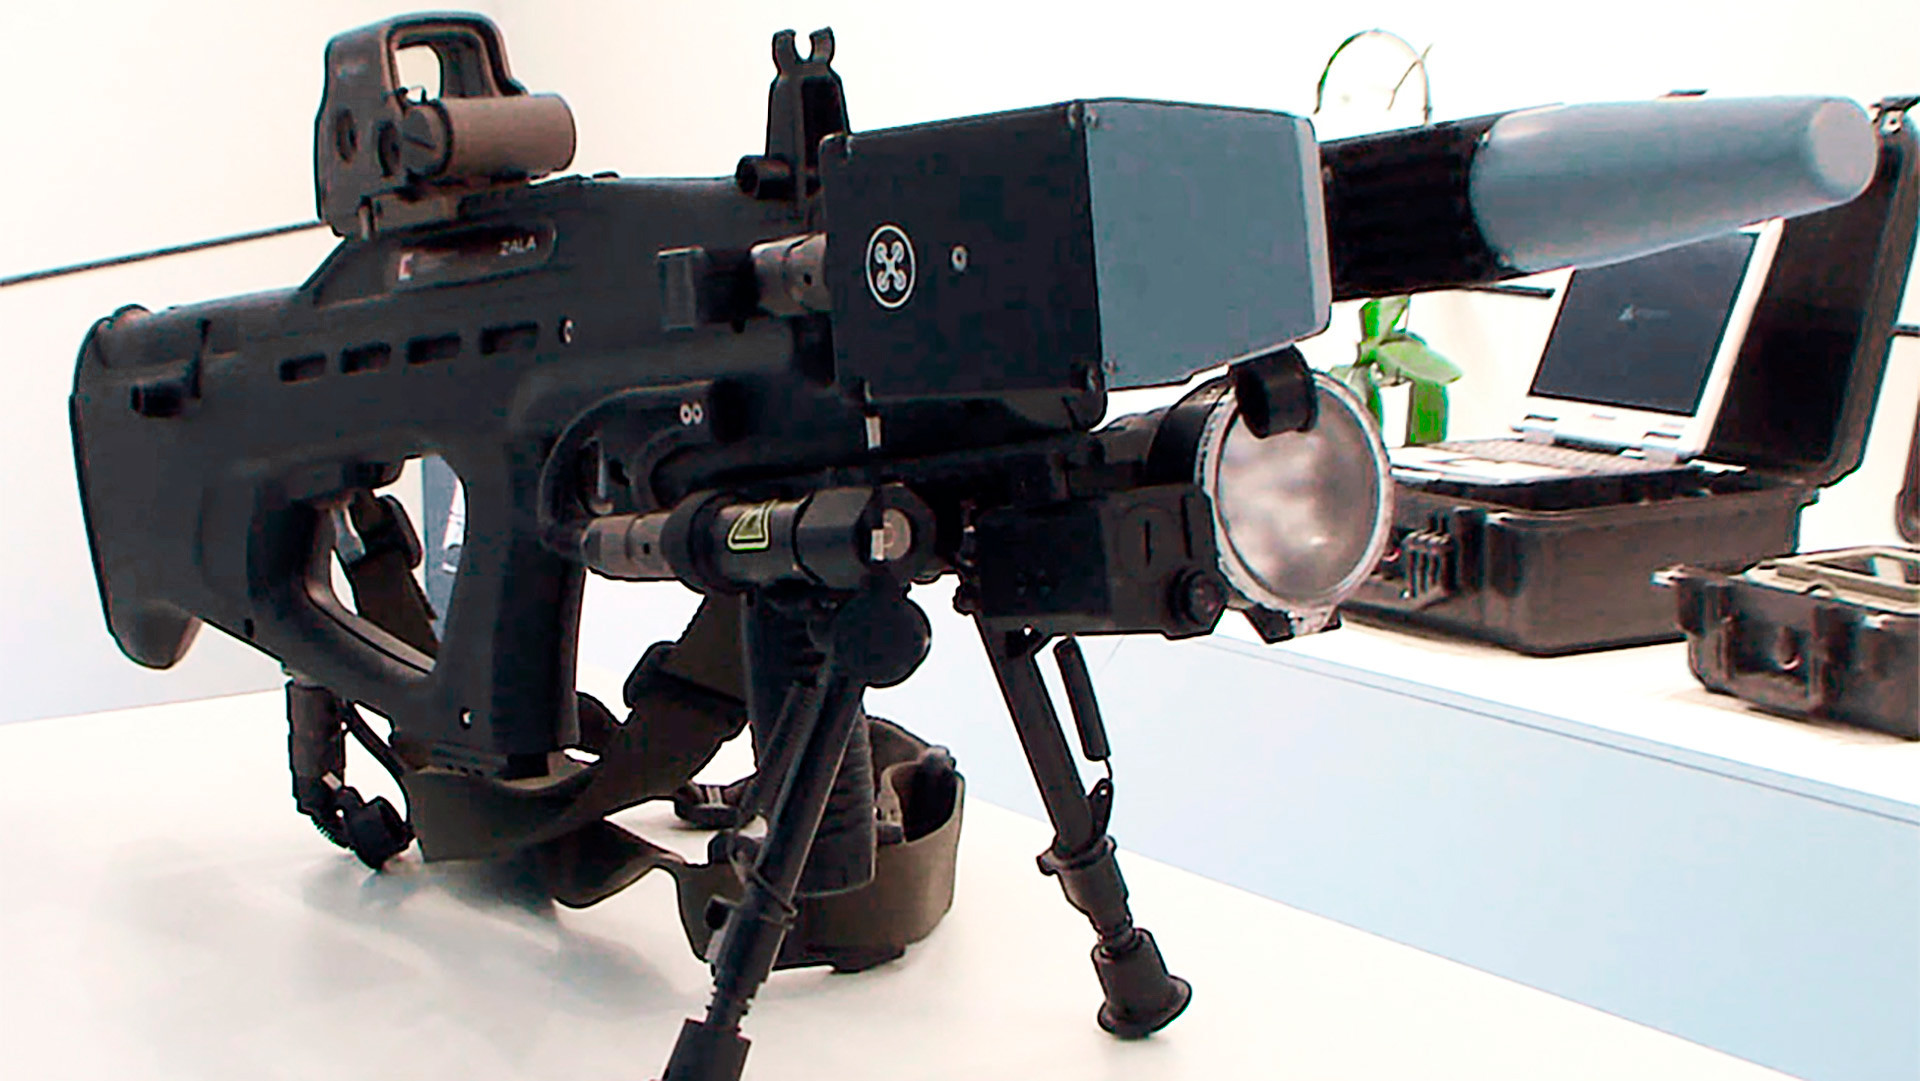 REX-1 is one of the Russia's first electromagnet rifles capable of fighting drones armadas.